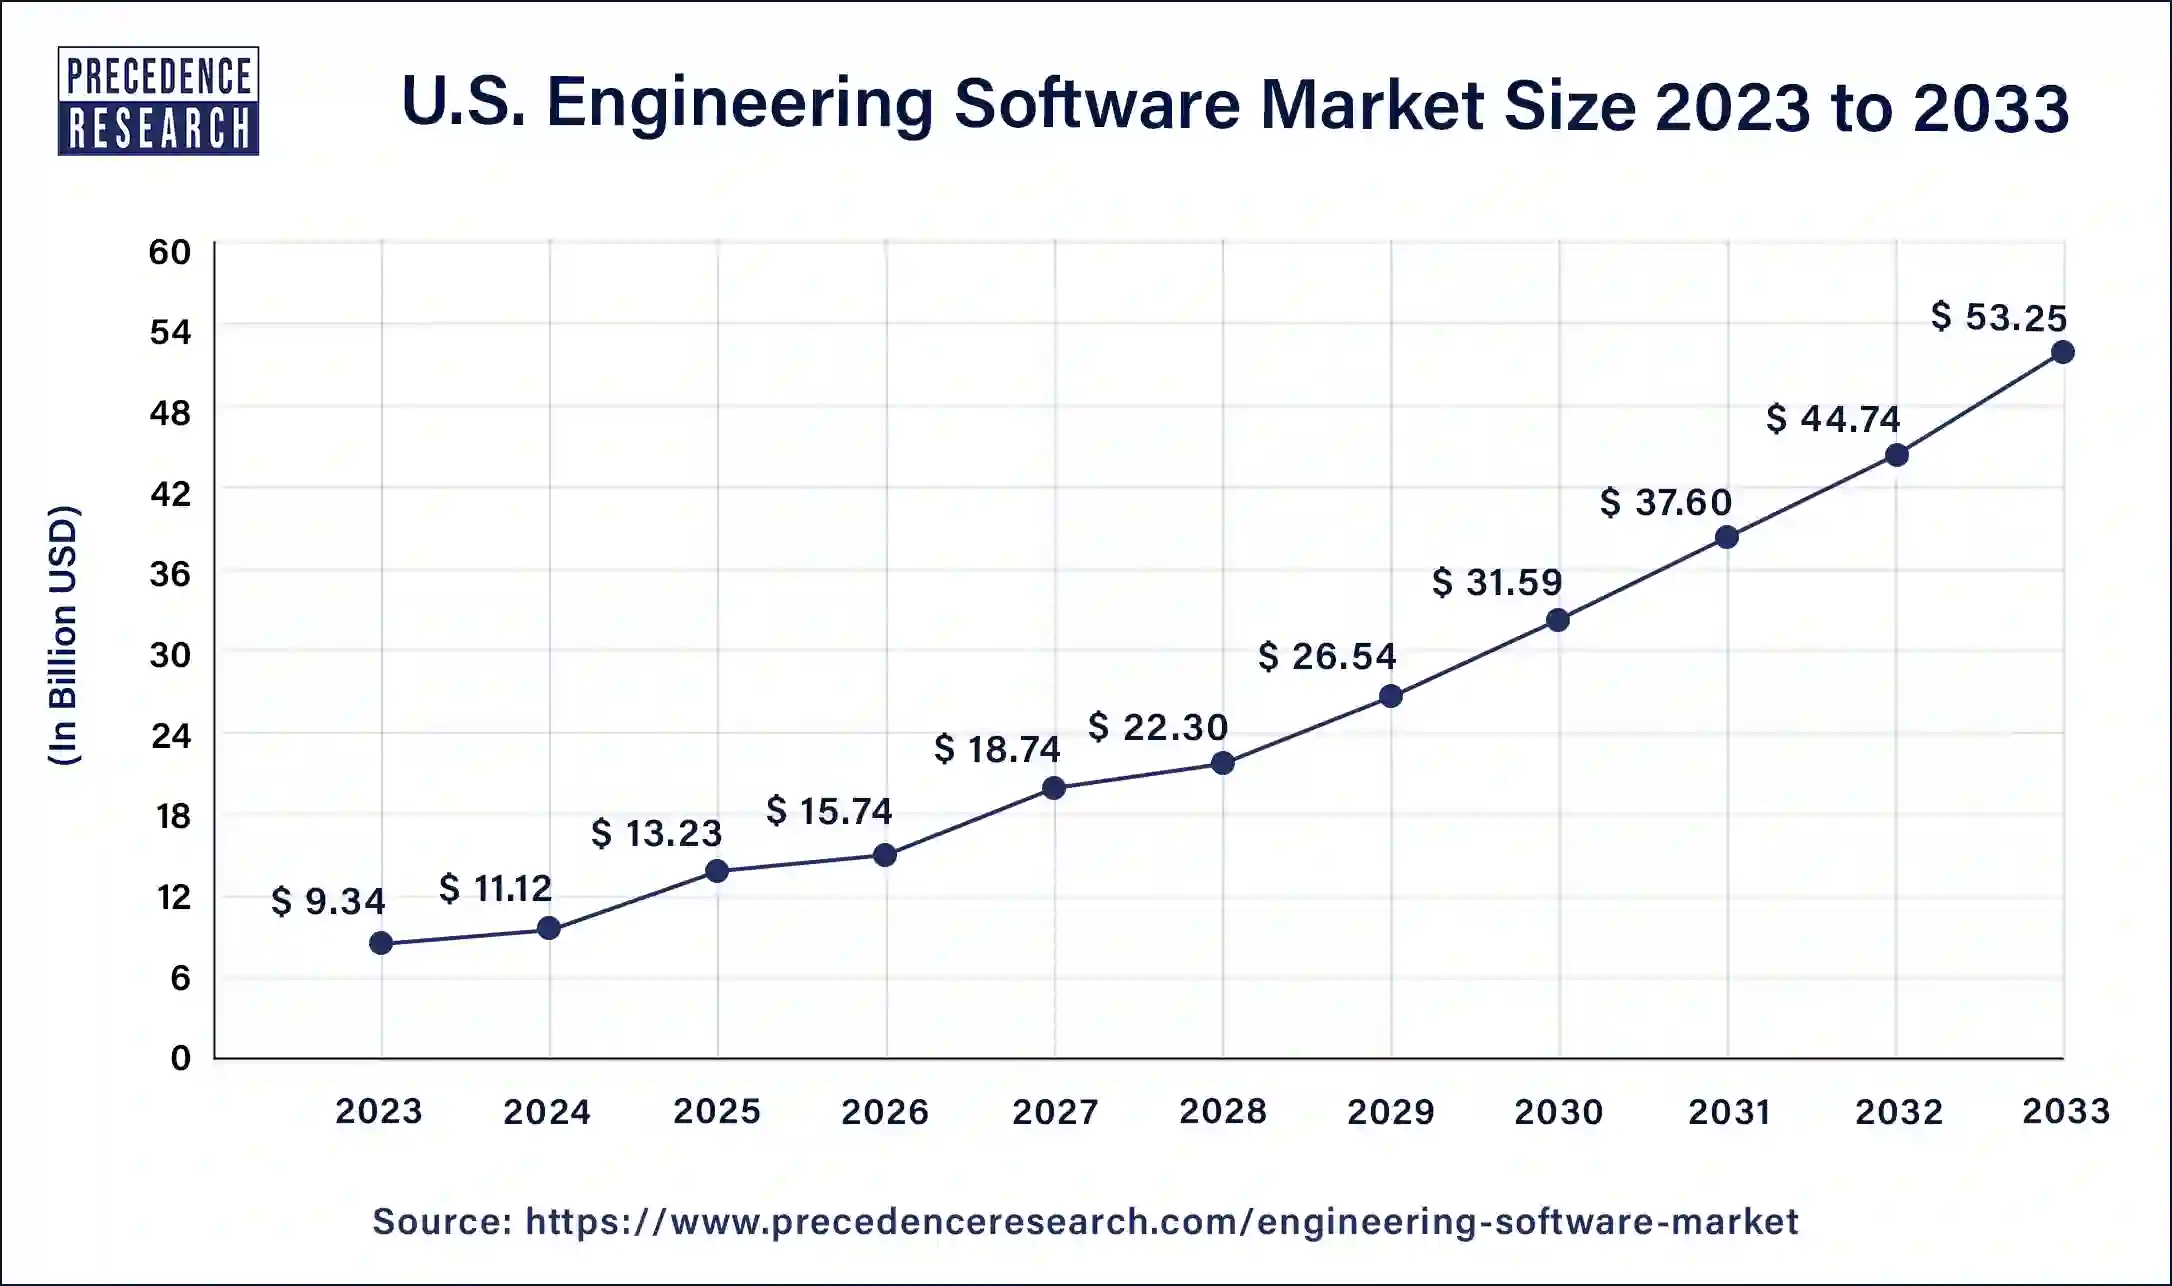 U.S. Engineering Software Market Size 2024 to 2033